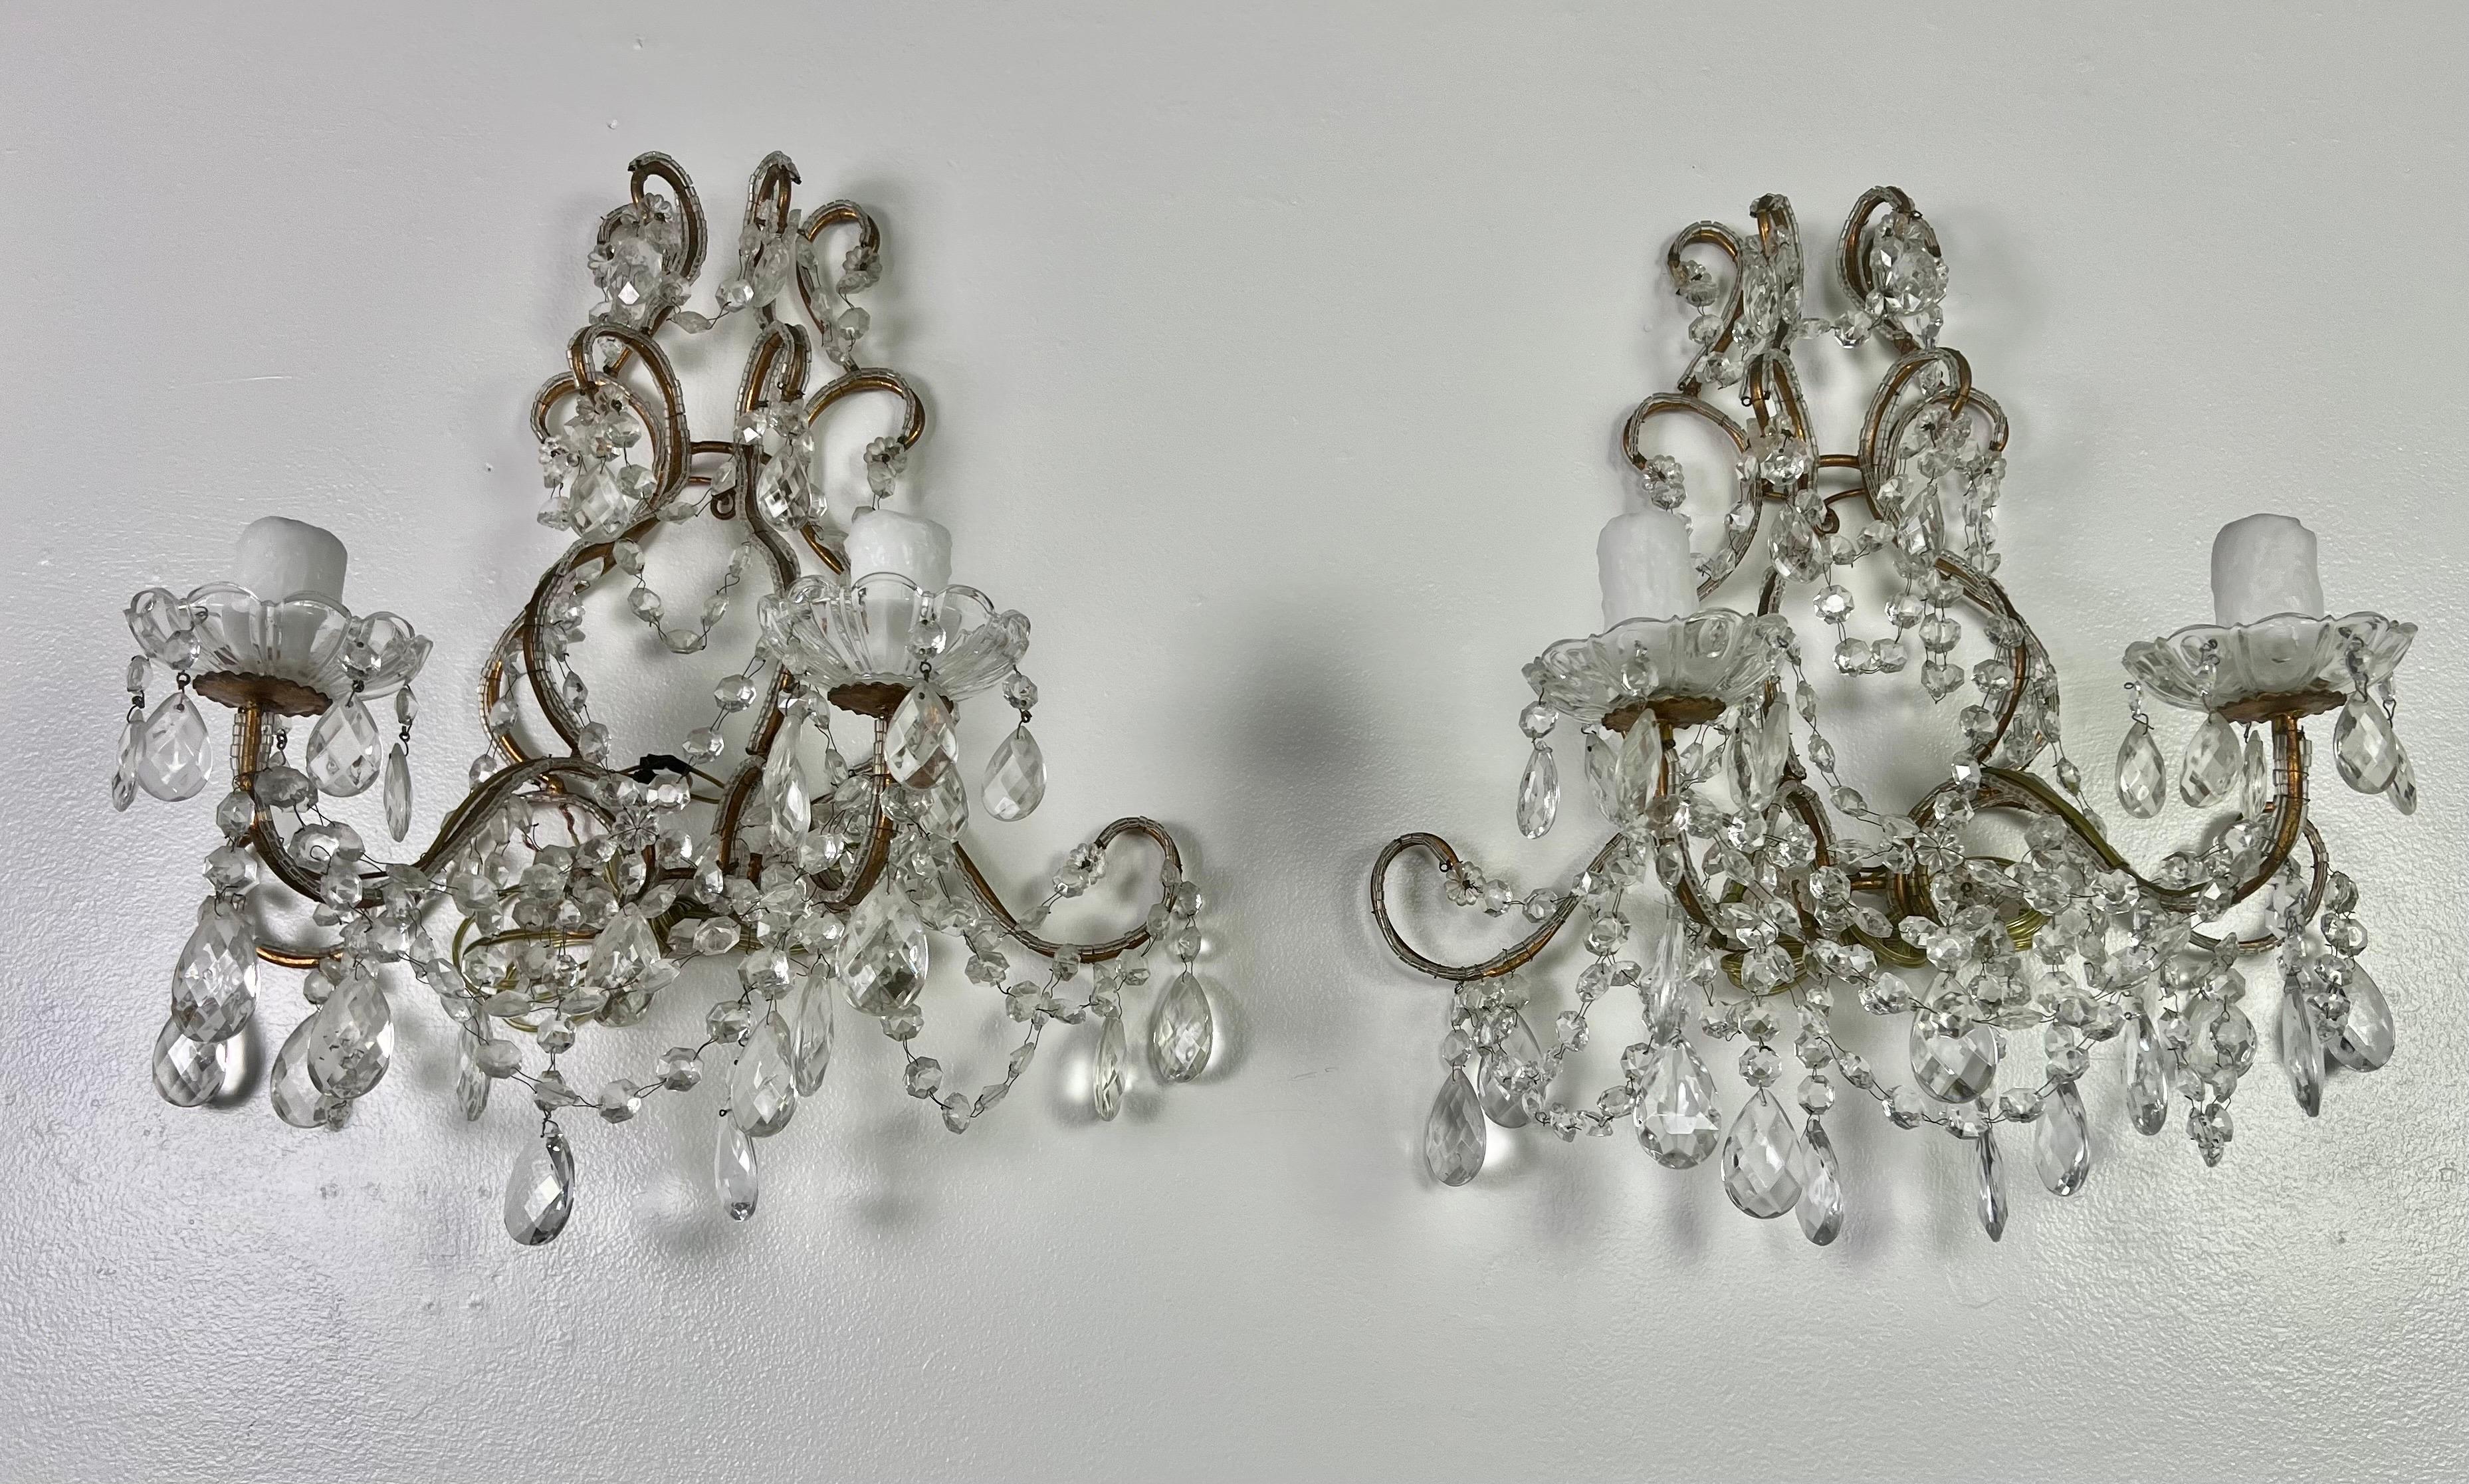 Pair of French crystal gilt metal 2-light sconces. The sconces are adorned with faceted almond shaped crystals and garlands of English cut beads. The sconces are newly rewired with drip wax candle covers.